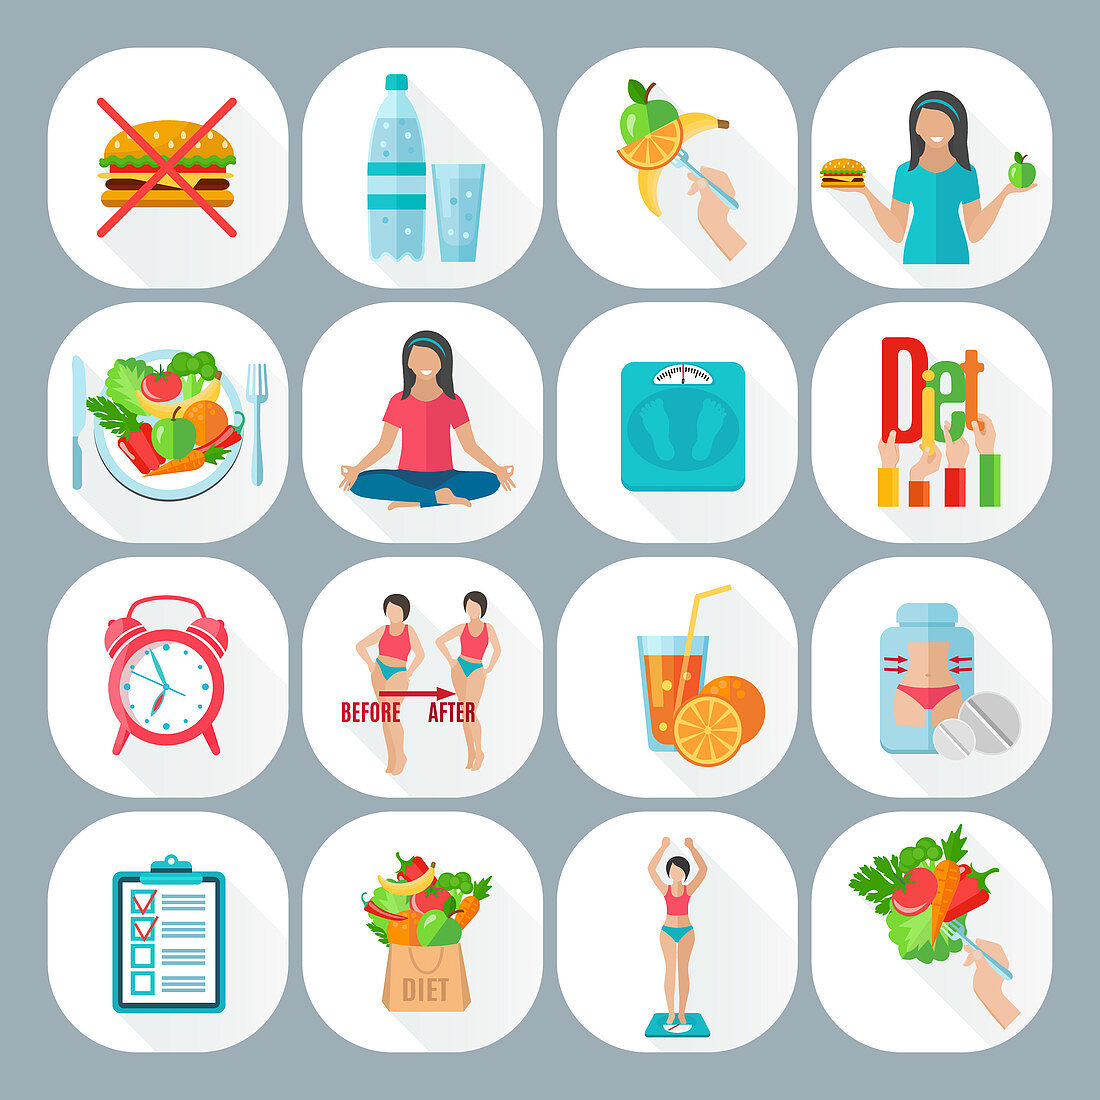 Weight loss icons, illustration